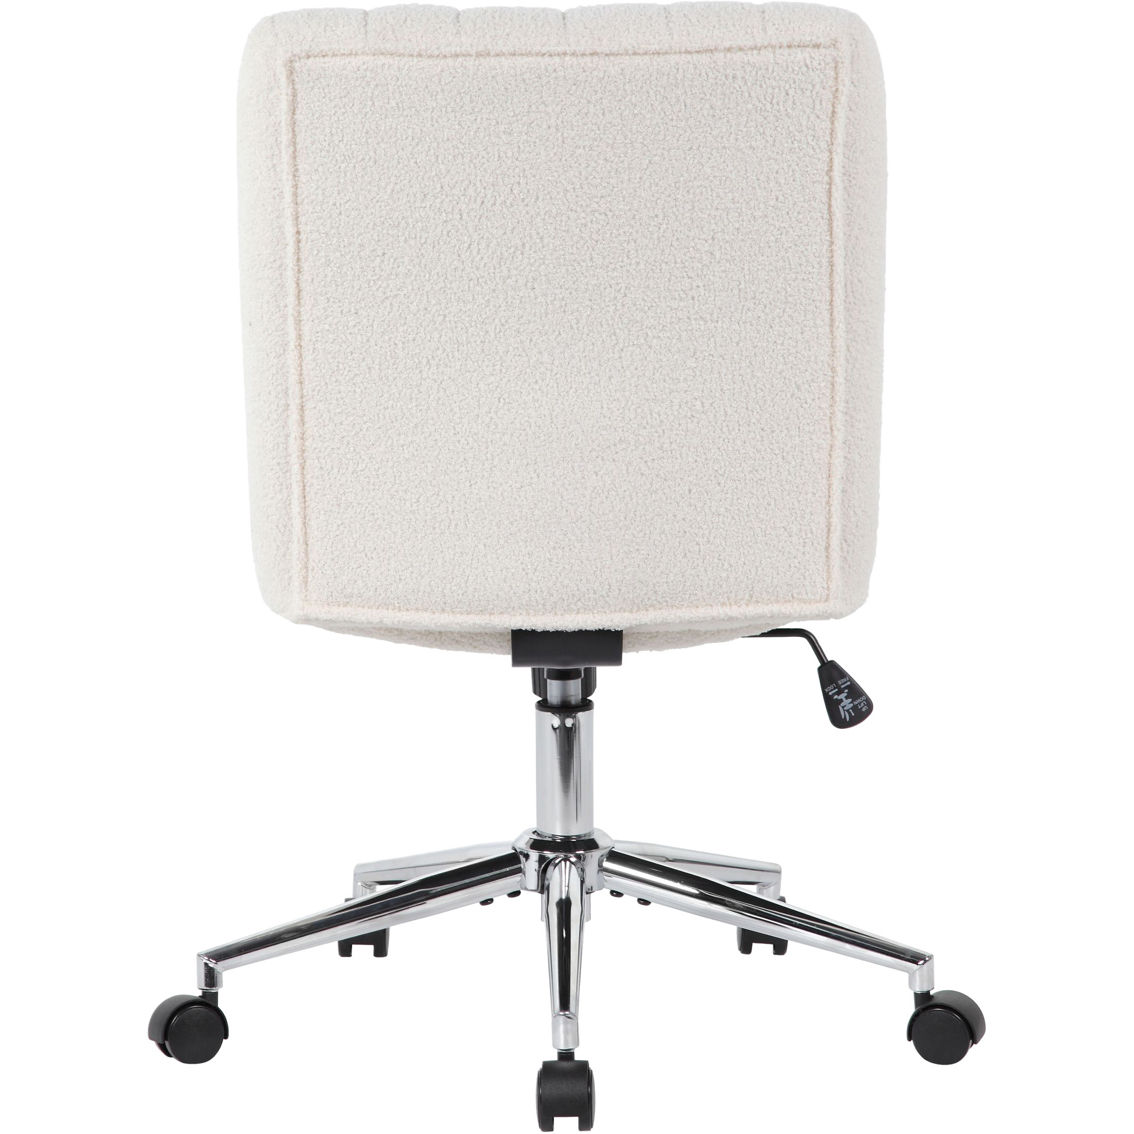 Presidential Seating Boss Boucle Task Chair - Image 2 of 3